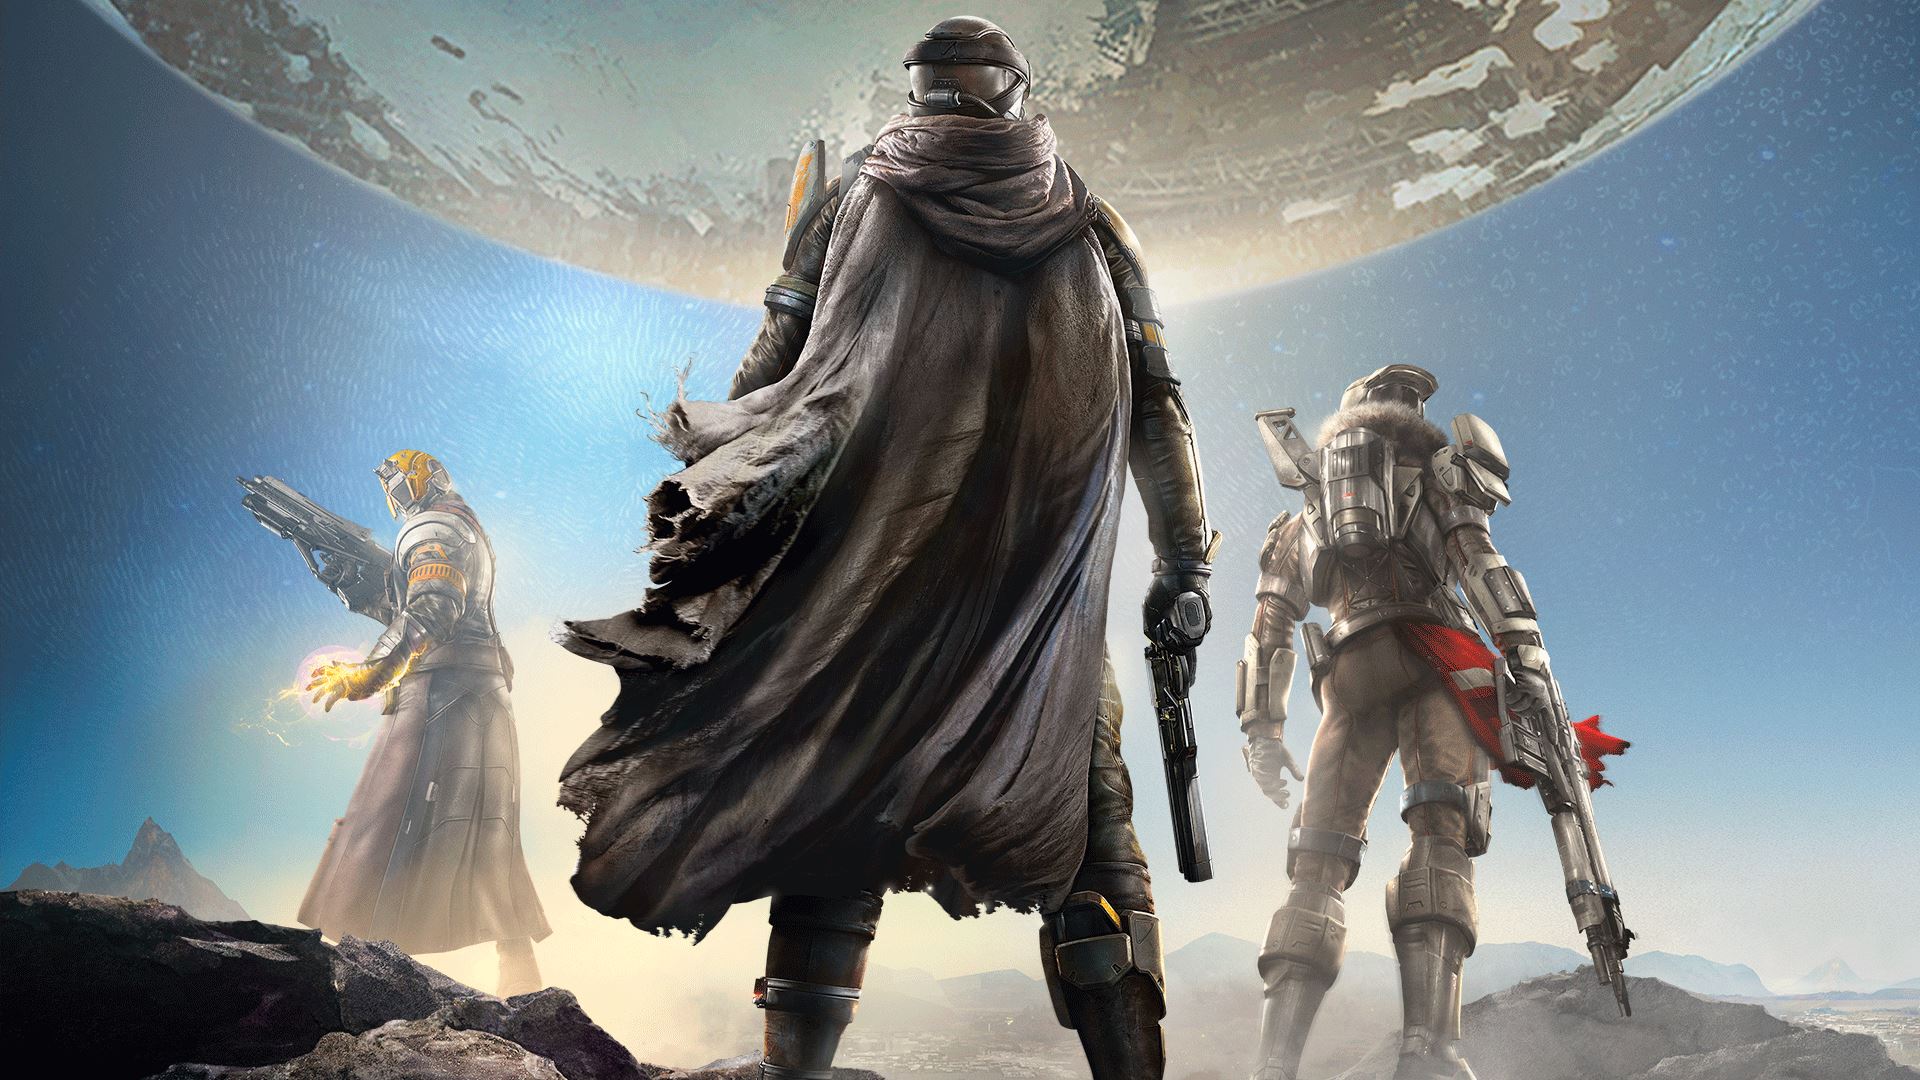 Did the Destiny beta harm expectations of the final game?